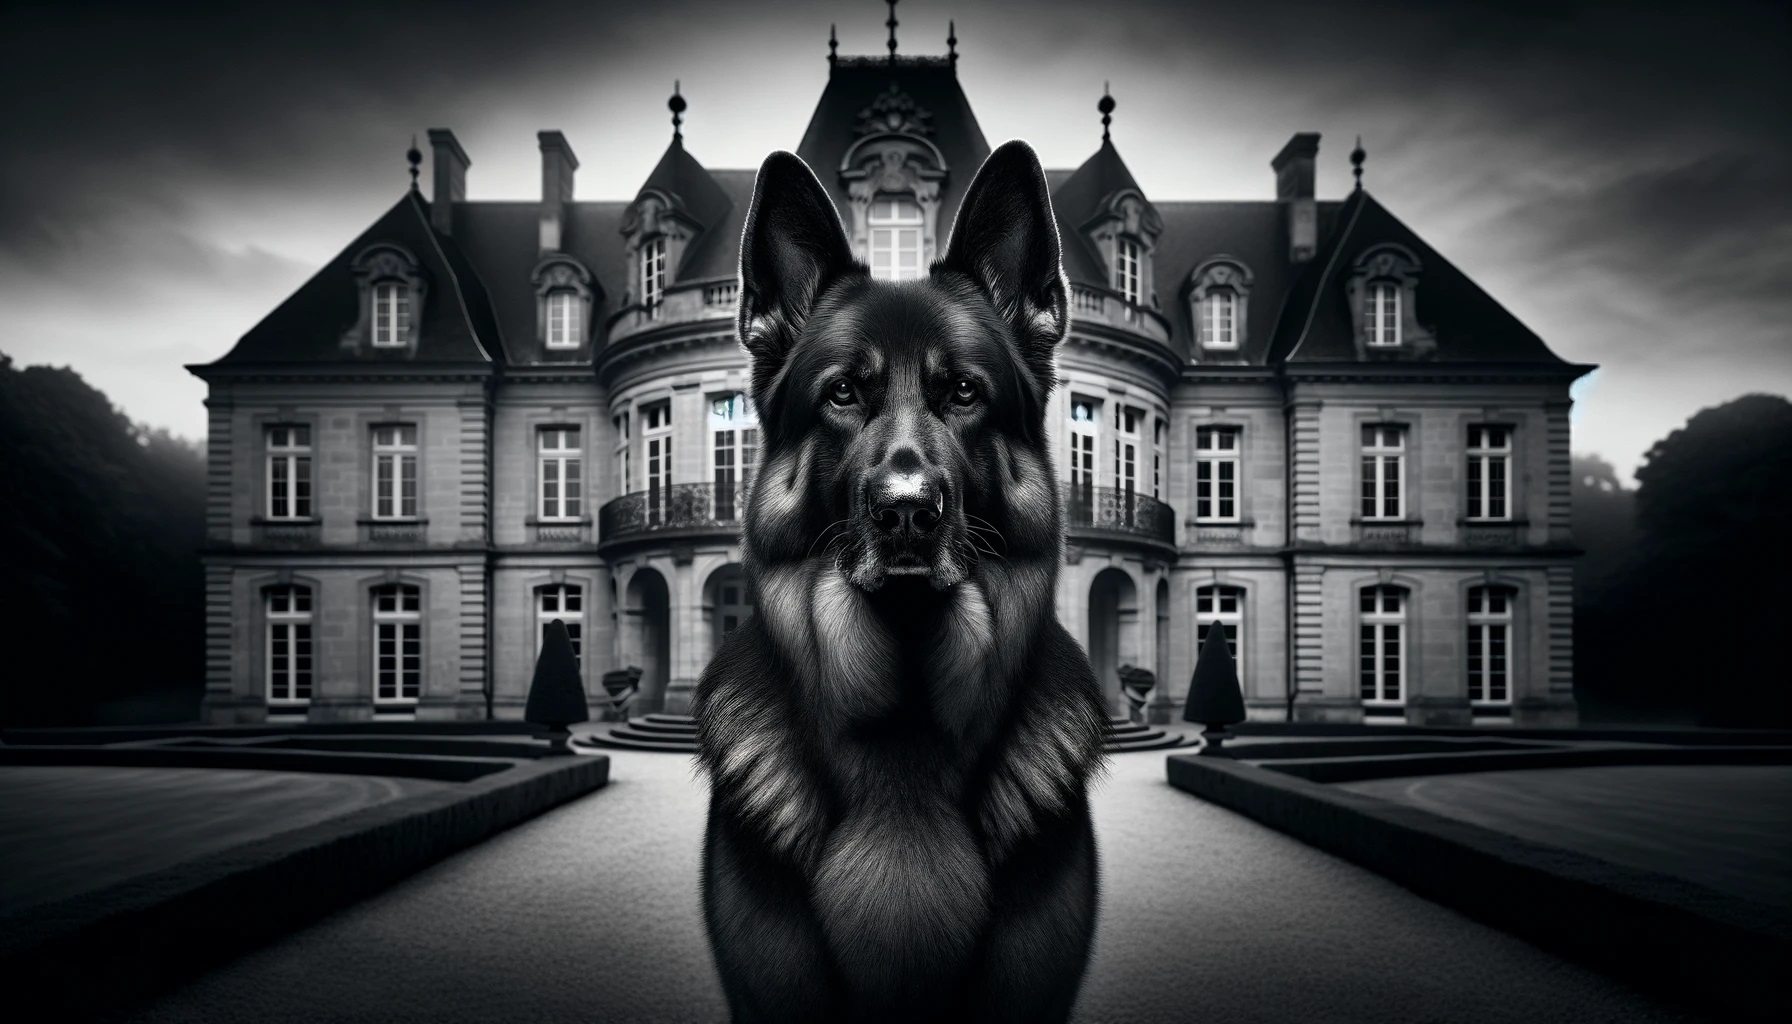 showcasing a regal and imposing German Shepherd standing at attention in front of a stately, European-style manor